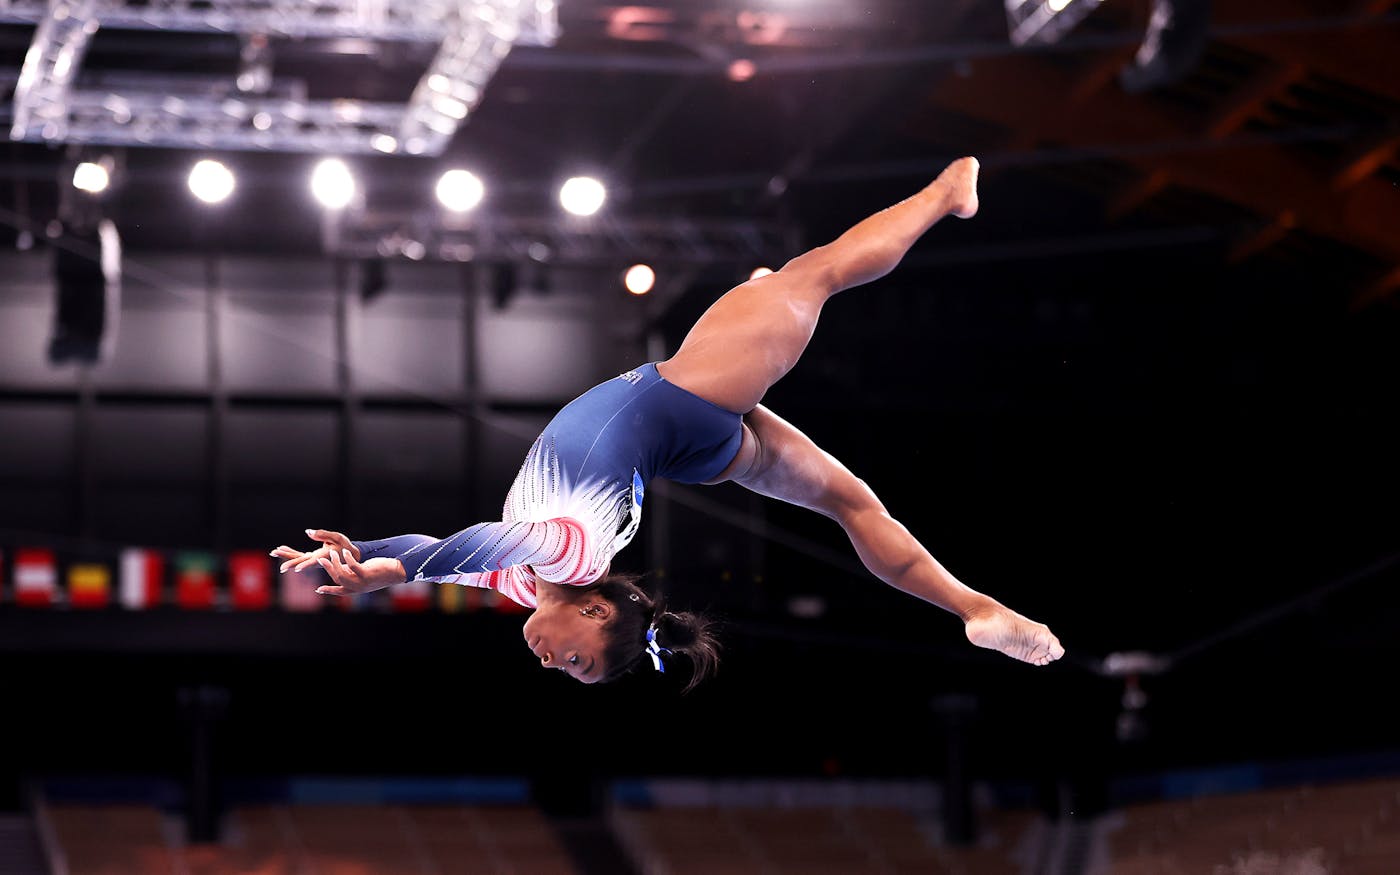 What Should Fans Expect From the Next Phase of Simone Biles's